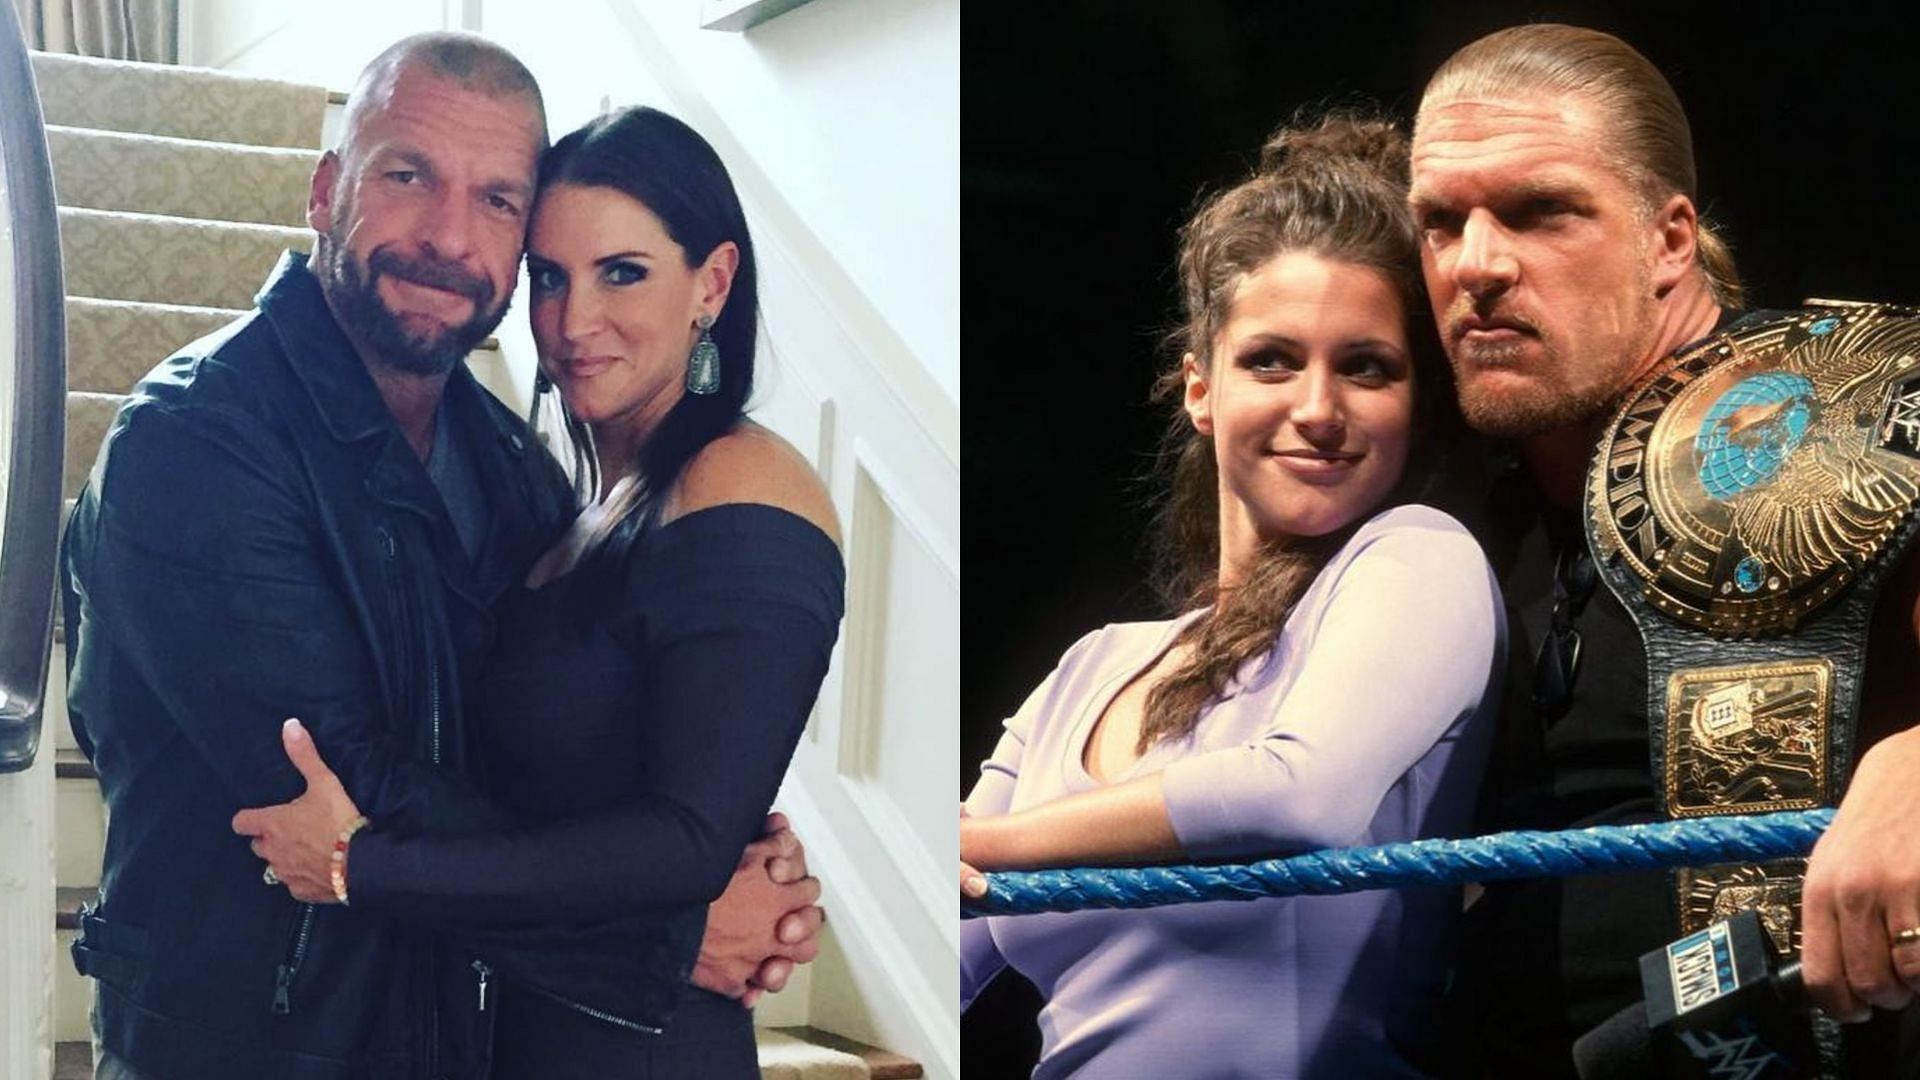 Triple H reveals how uncomfortable Vince McMahon made it for him when he  wanted to marry Stephanie McMahon